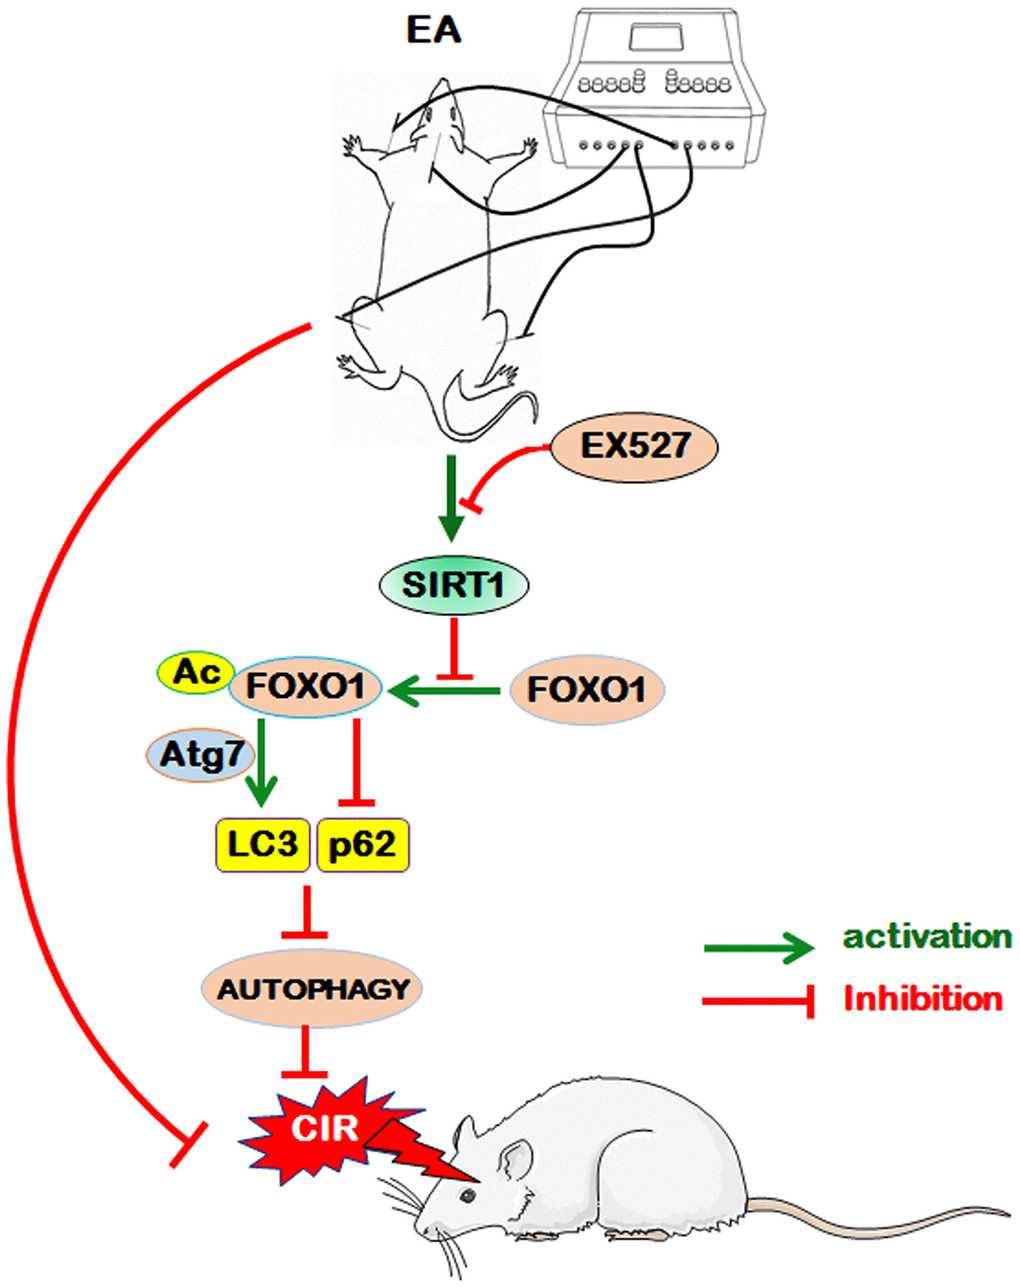 The proposed scheme for the possible mechanism of EA pretreatment suppresses CIR-induced autophagy via the SIRT1-FOXO1 signaling pathway. EA pretreatment at GV20, LI11, and ST36 significantly alleviated neurological deficits, reduced infarct volume, increased the dendritic spine density of cortical neurons, decreased the LC3-II/LC3-I ratio, and up-regulated p62 level. The above beneficial effects may be achieved by the activation of SITR1 and the inhibition of acetylation of FOXO1, as well as the suppression of Atg7 expression and the interaction of Ac-FOXO1 and Atg7.